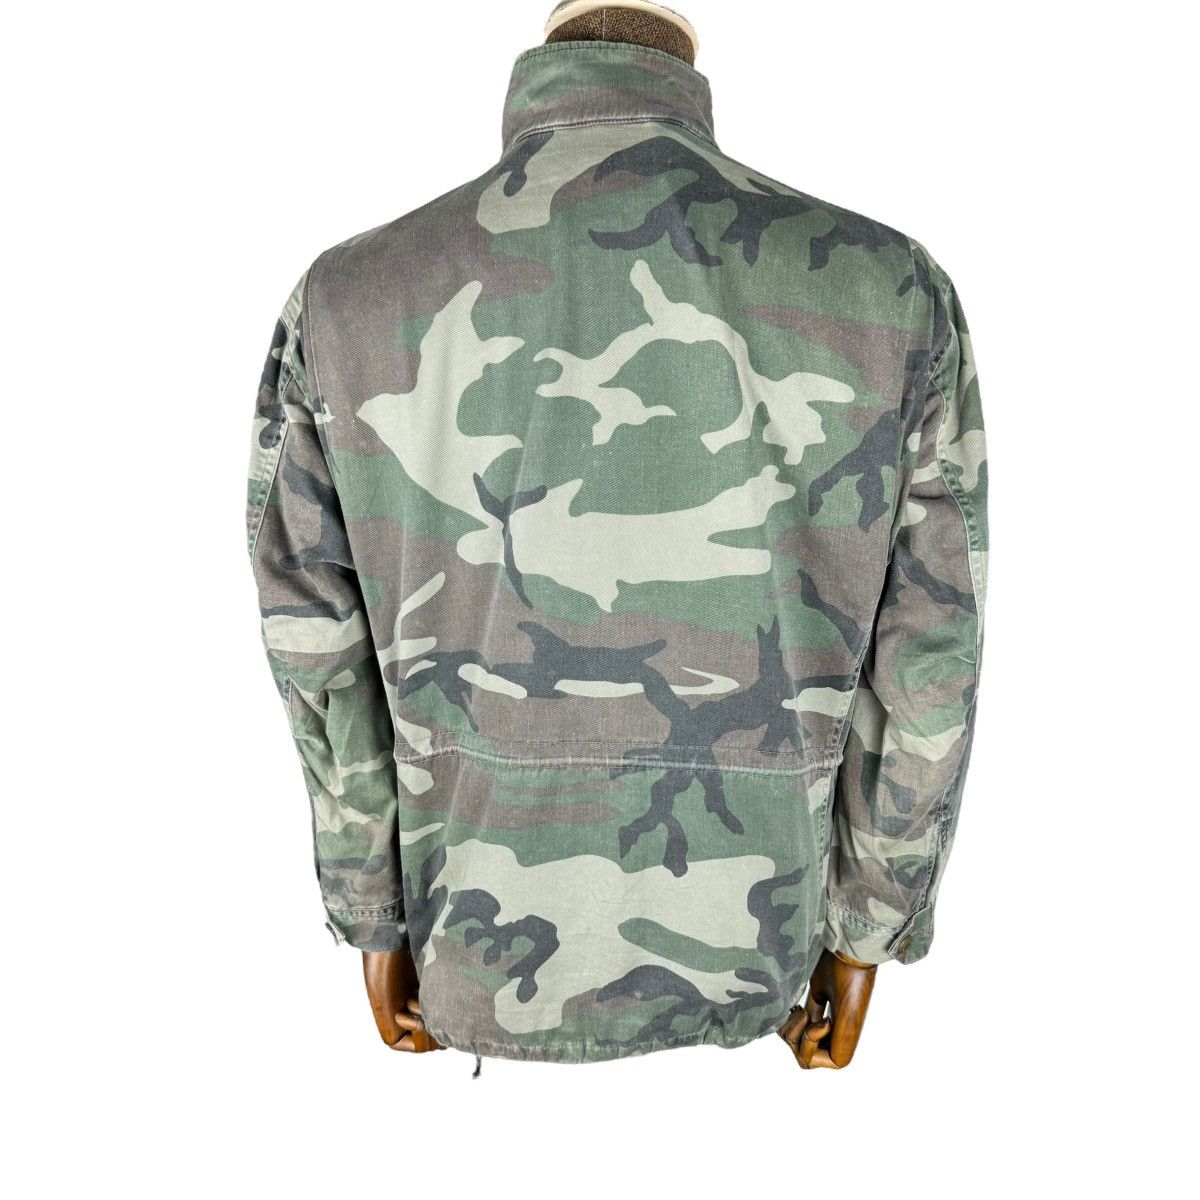 🔥WTAPS M65 Death From Above Ripstop JACKET - 5